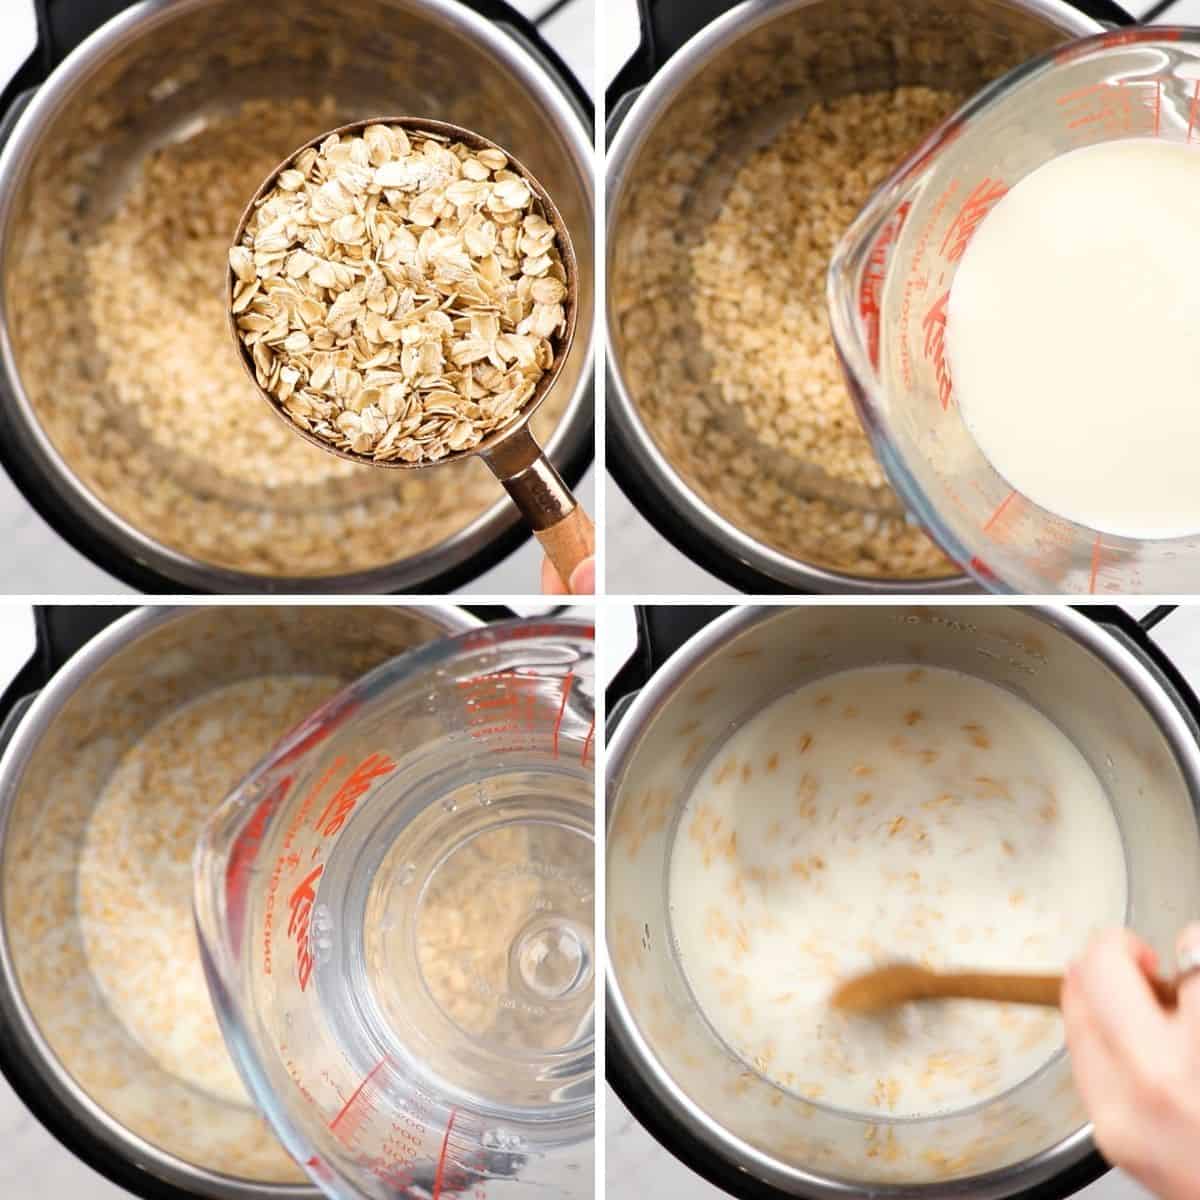 Process photos of adding ingredients to a pressure cooker to make oatmeal.